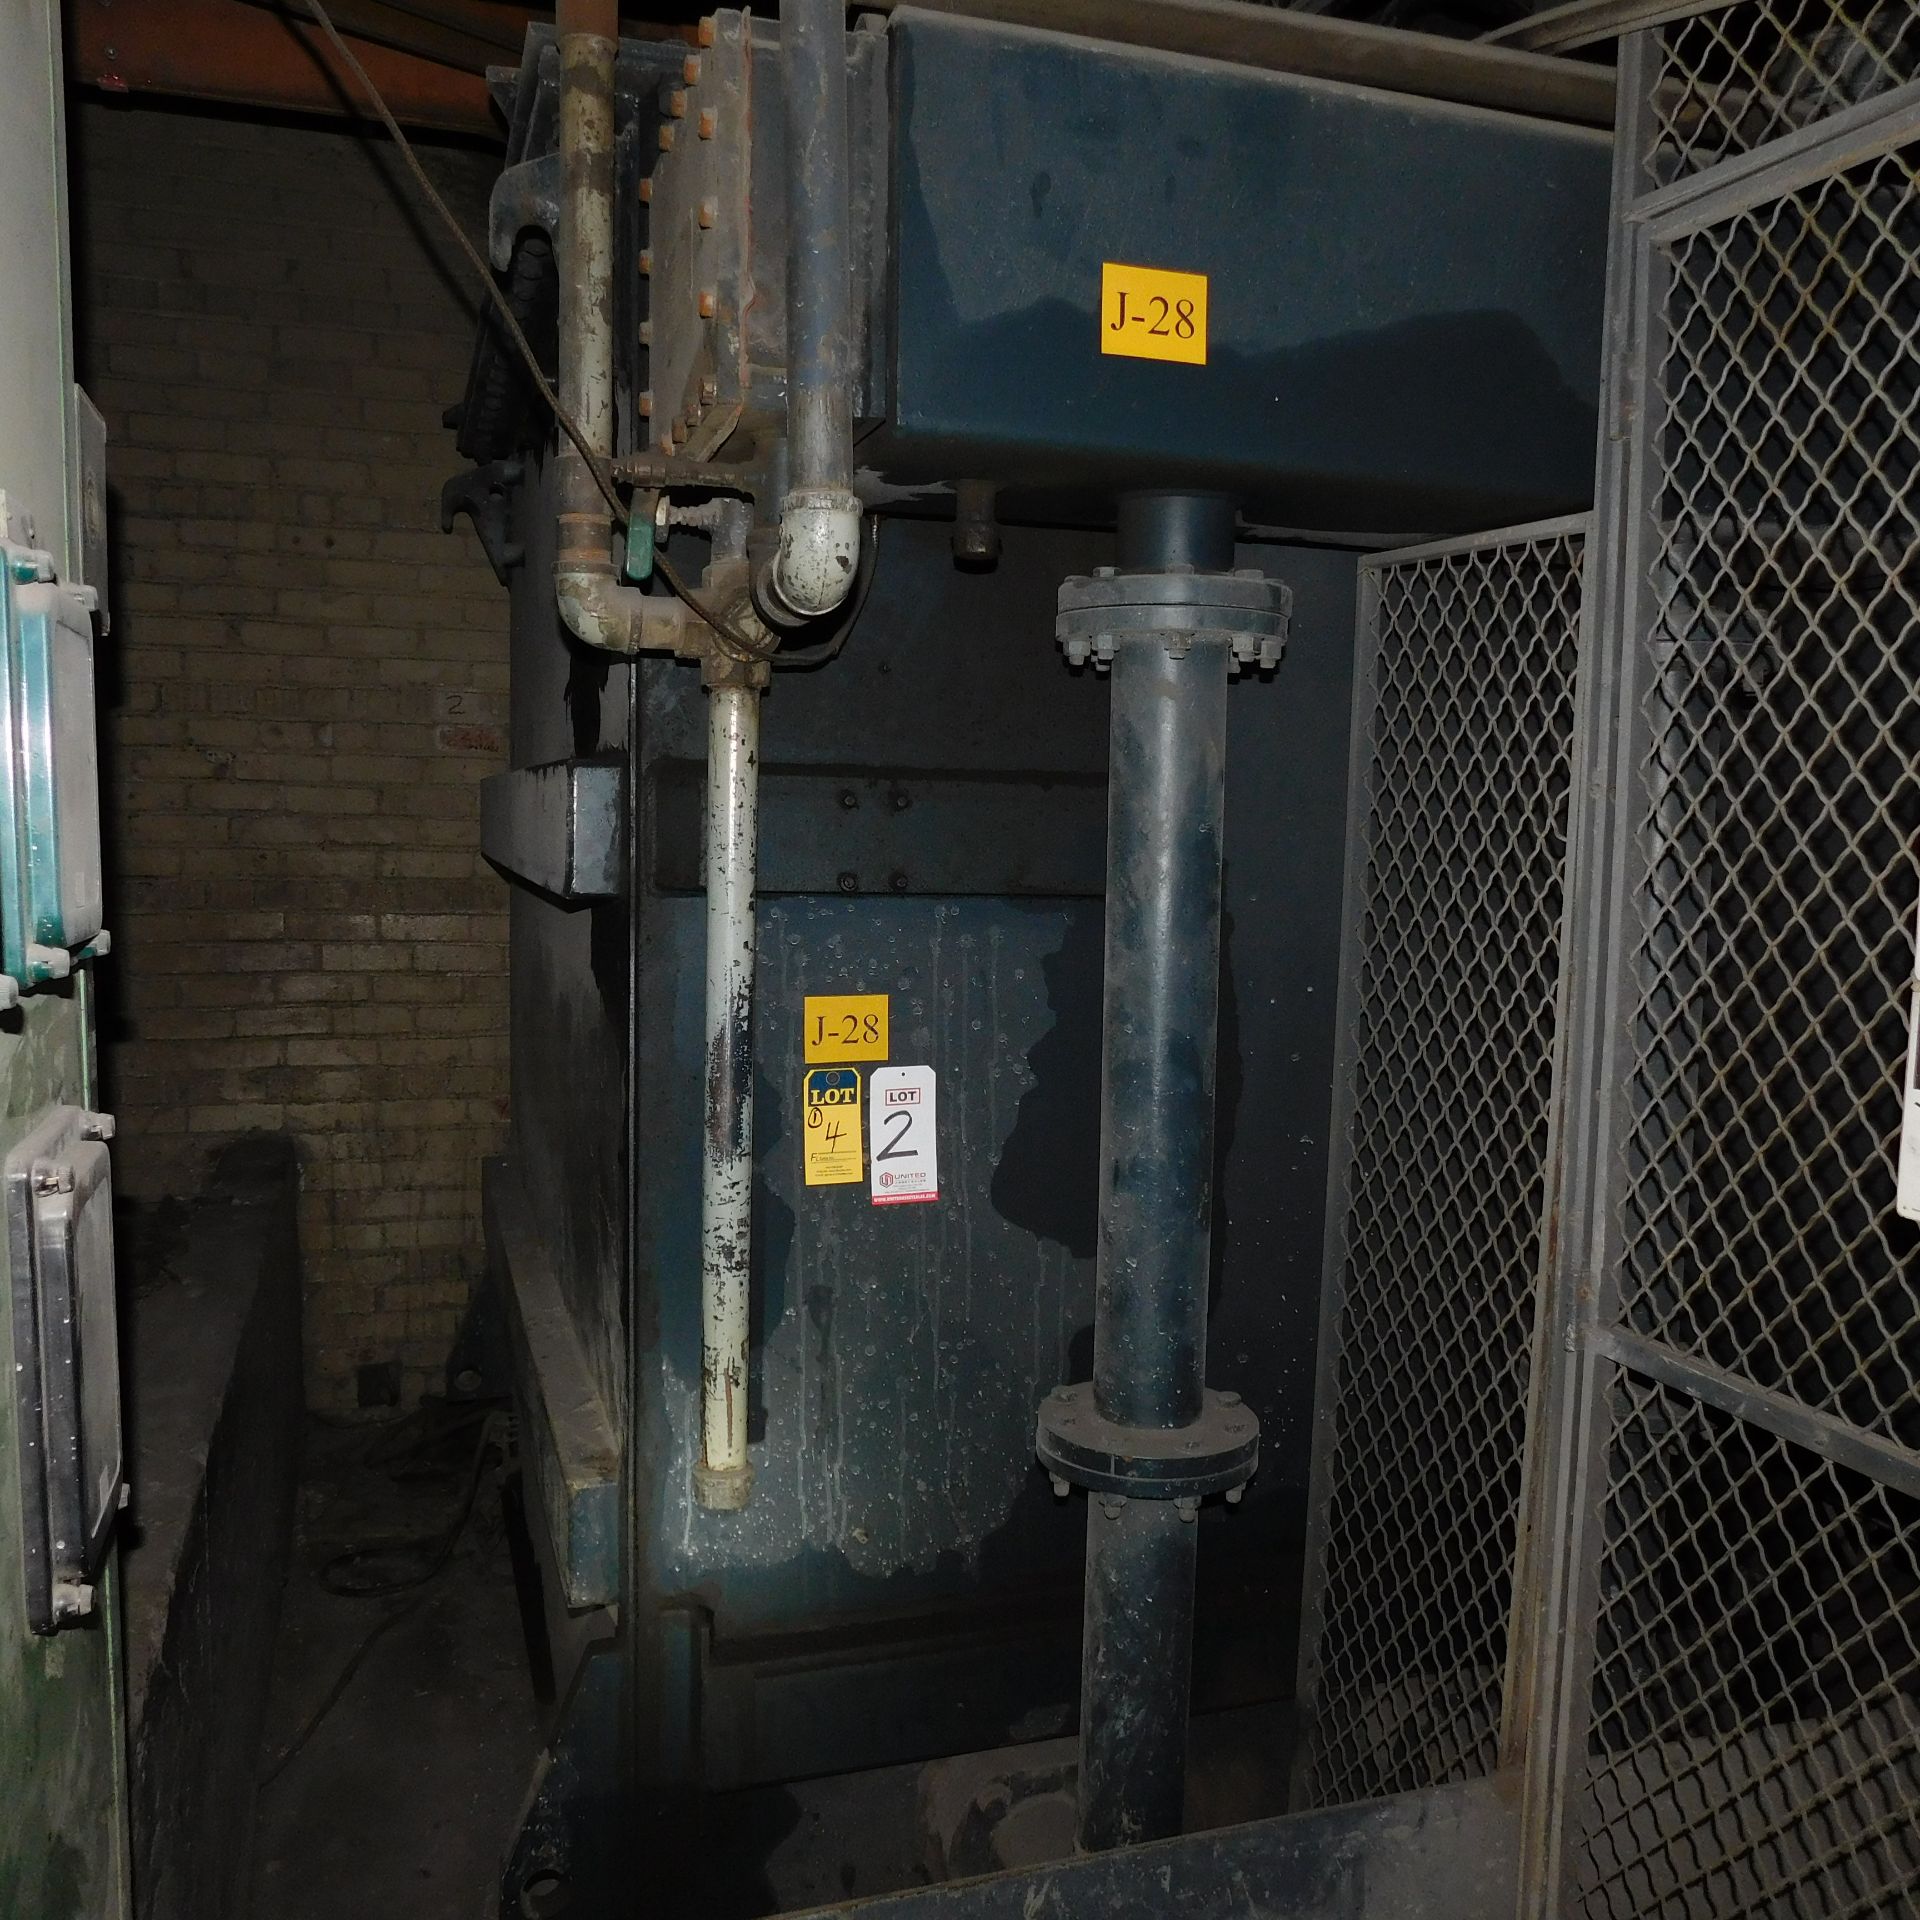 GE ARC FURNACE TRANSFORMER 2000 KW W/ JOSLYN SWITCH, 13200 VOLT PRIMARY, 230 VOLT SECONDARY AND JOS